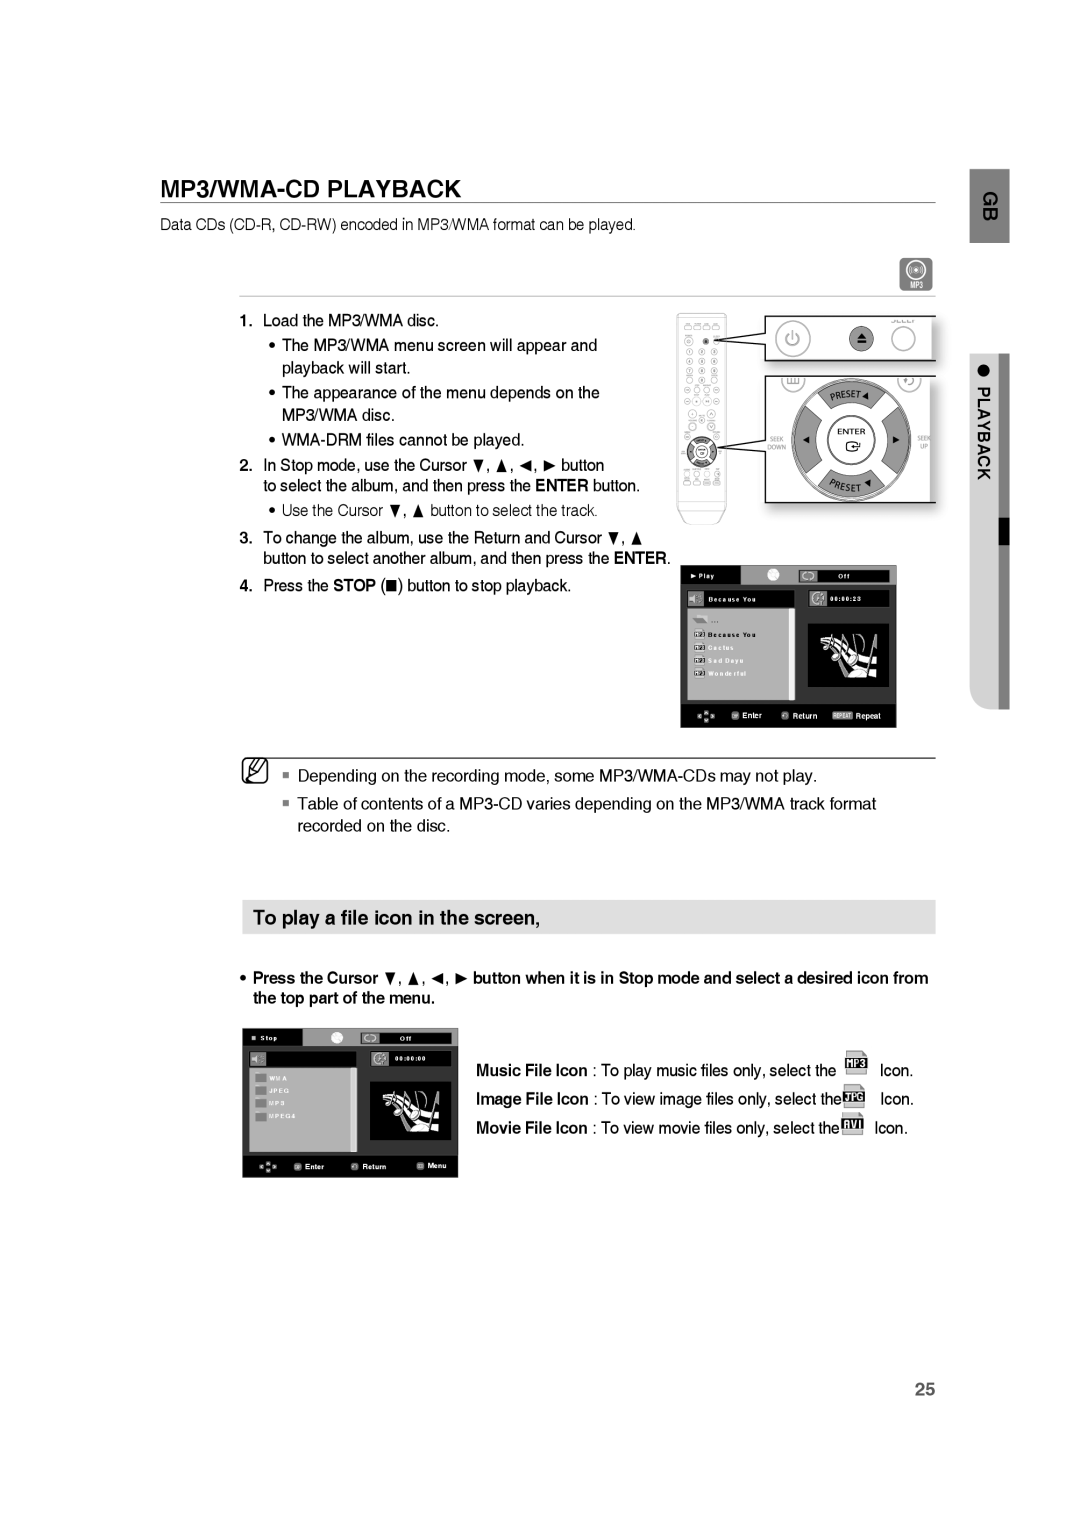 Samsung HE10T user manual MP3/WMA-CDPLAYBACK, To play a ﬁle icon in the screen, Playback 